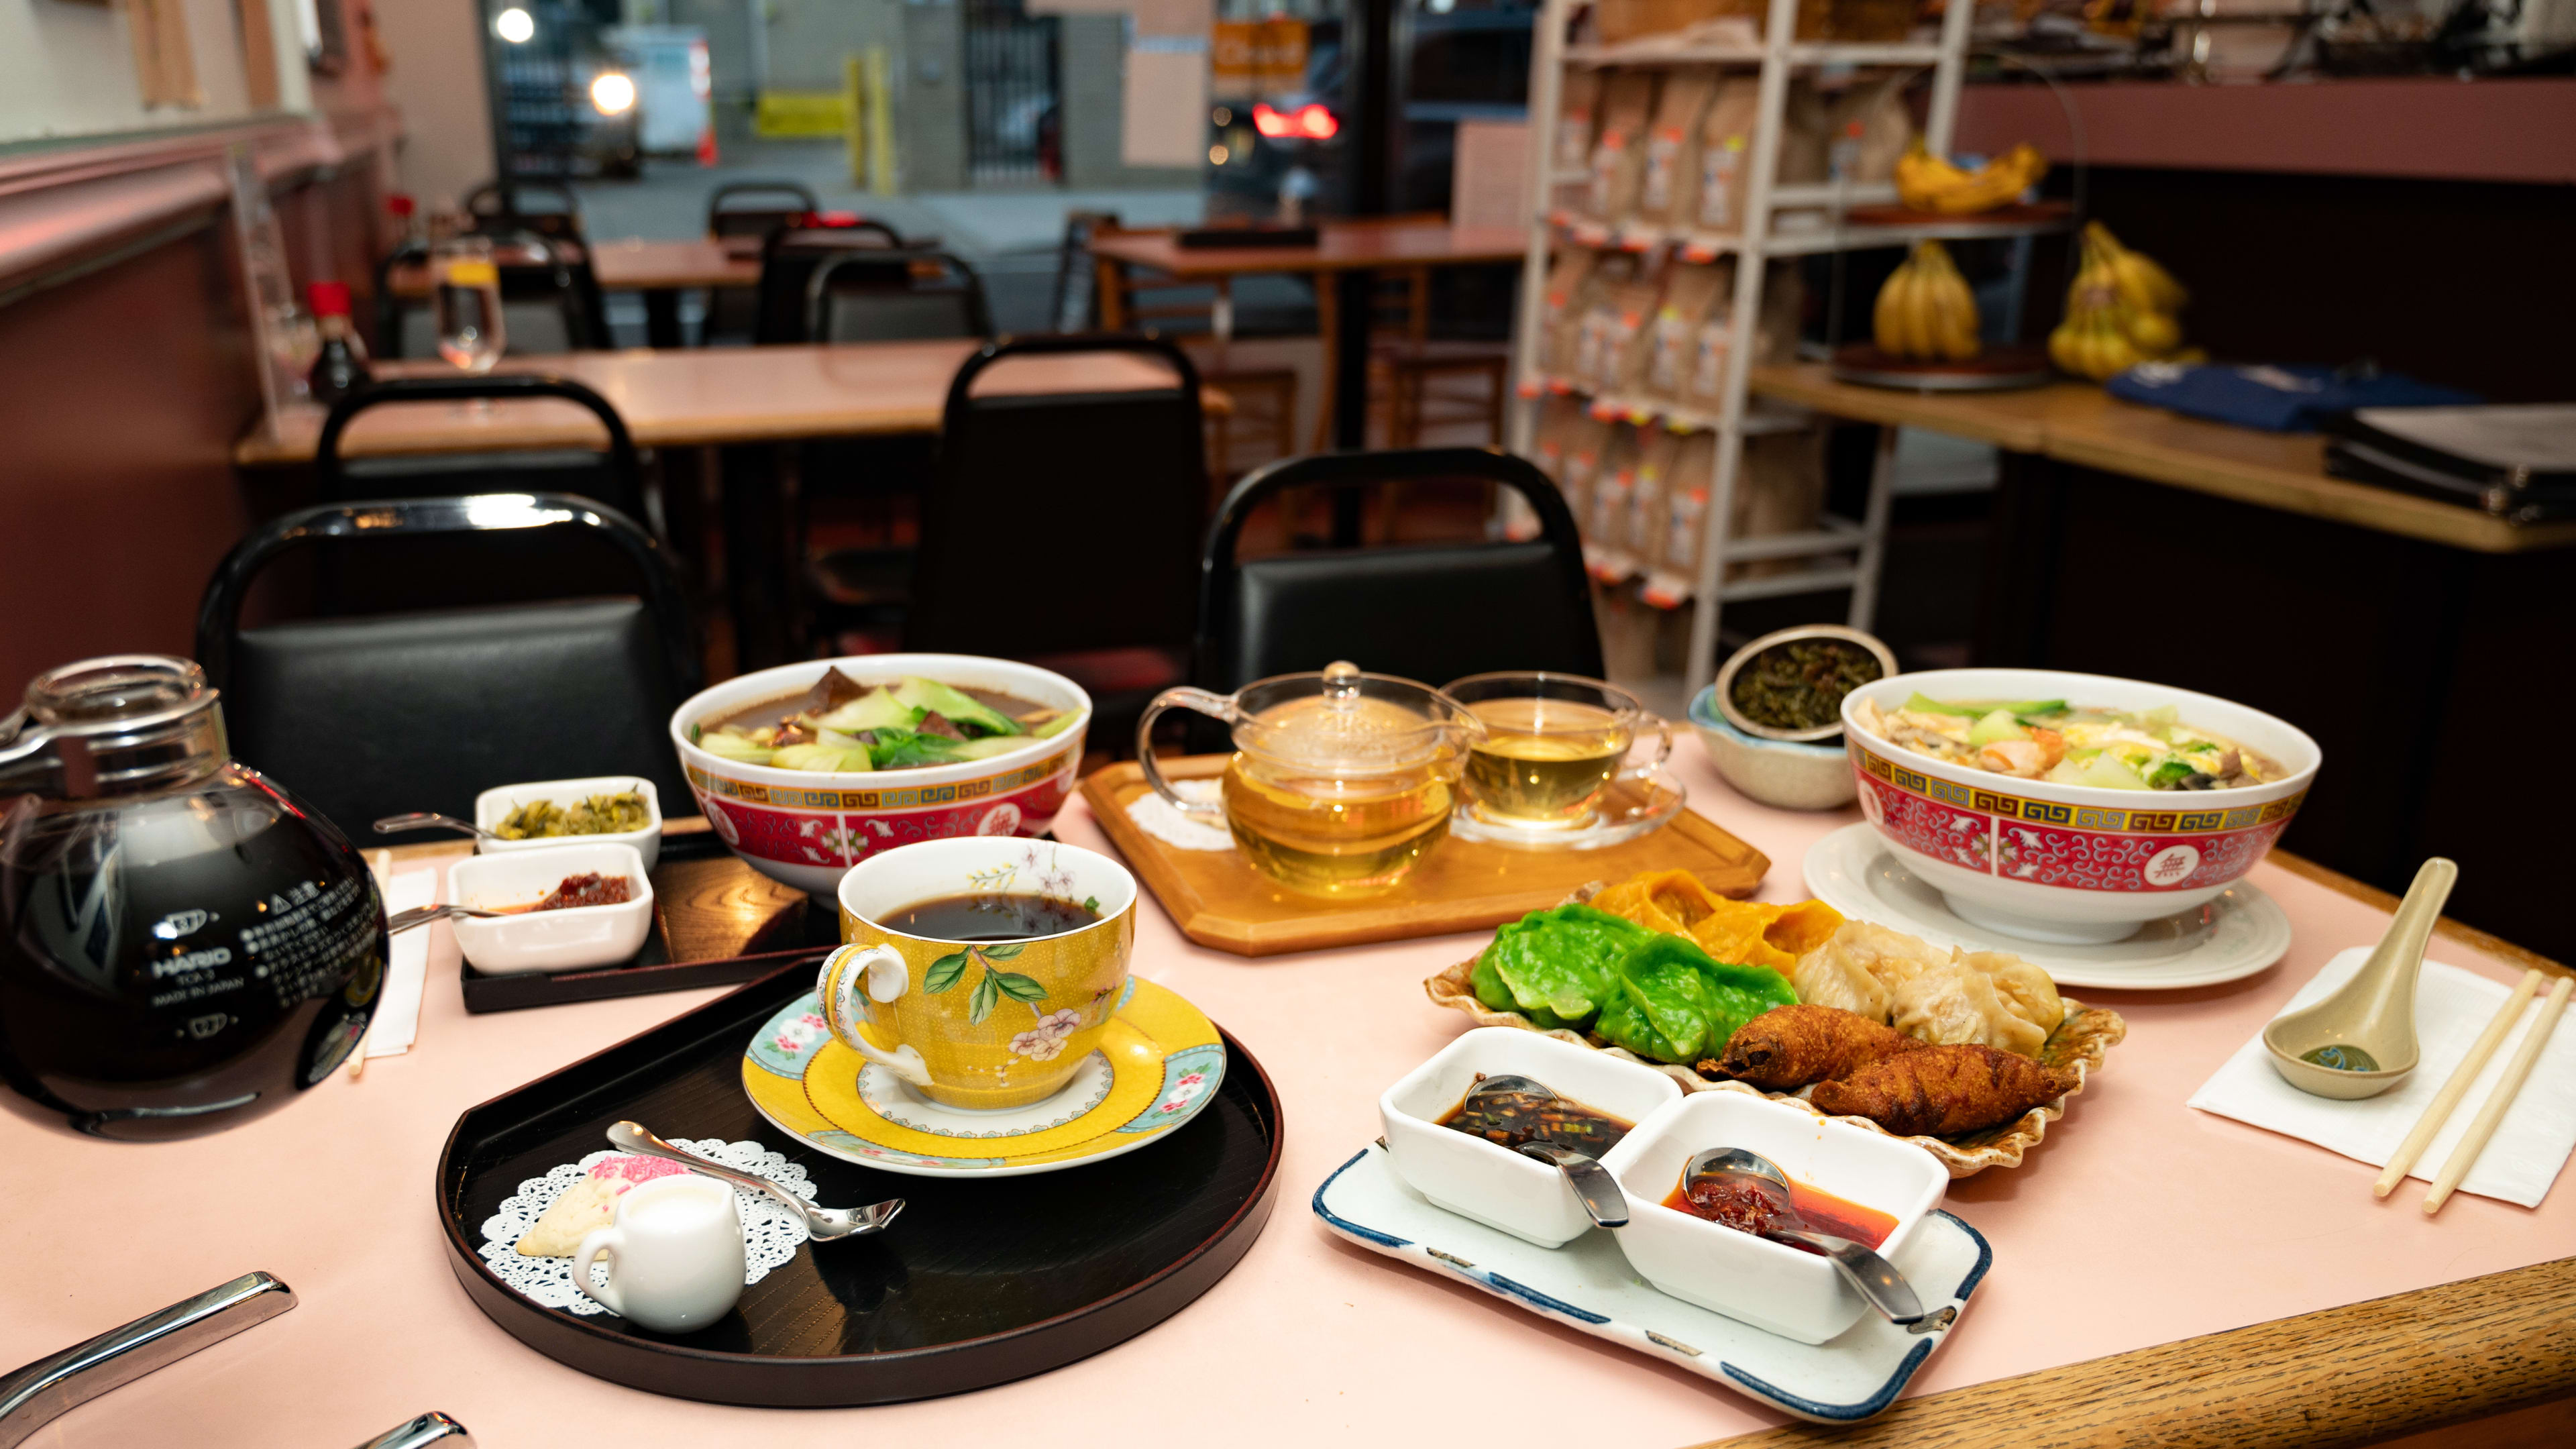 This is the food spread at Ray's Tea Cafe, which includes dumplings, tea, siphon coffee, and noodle soup.